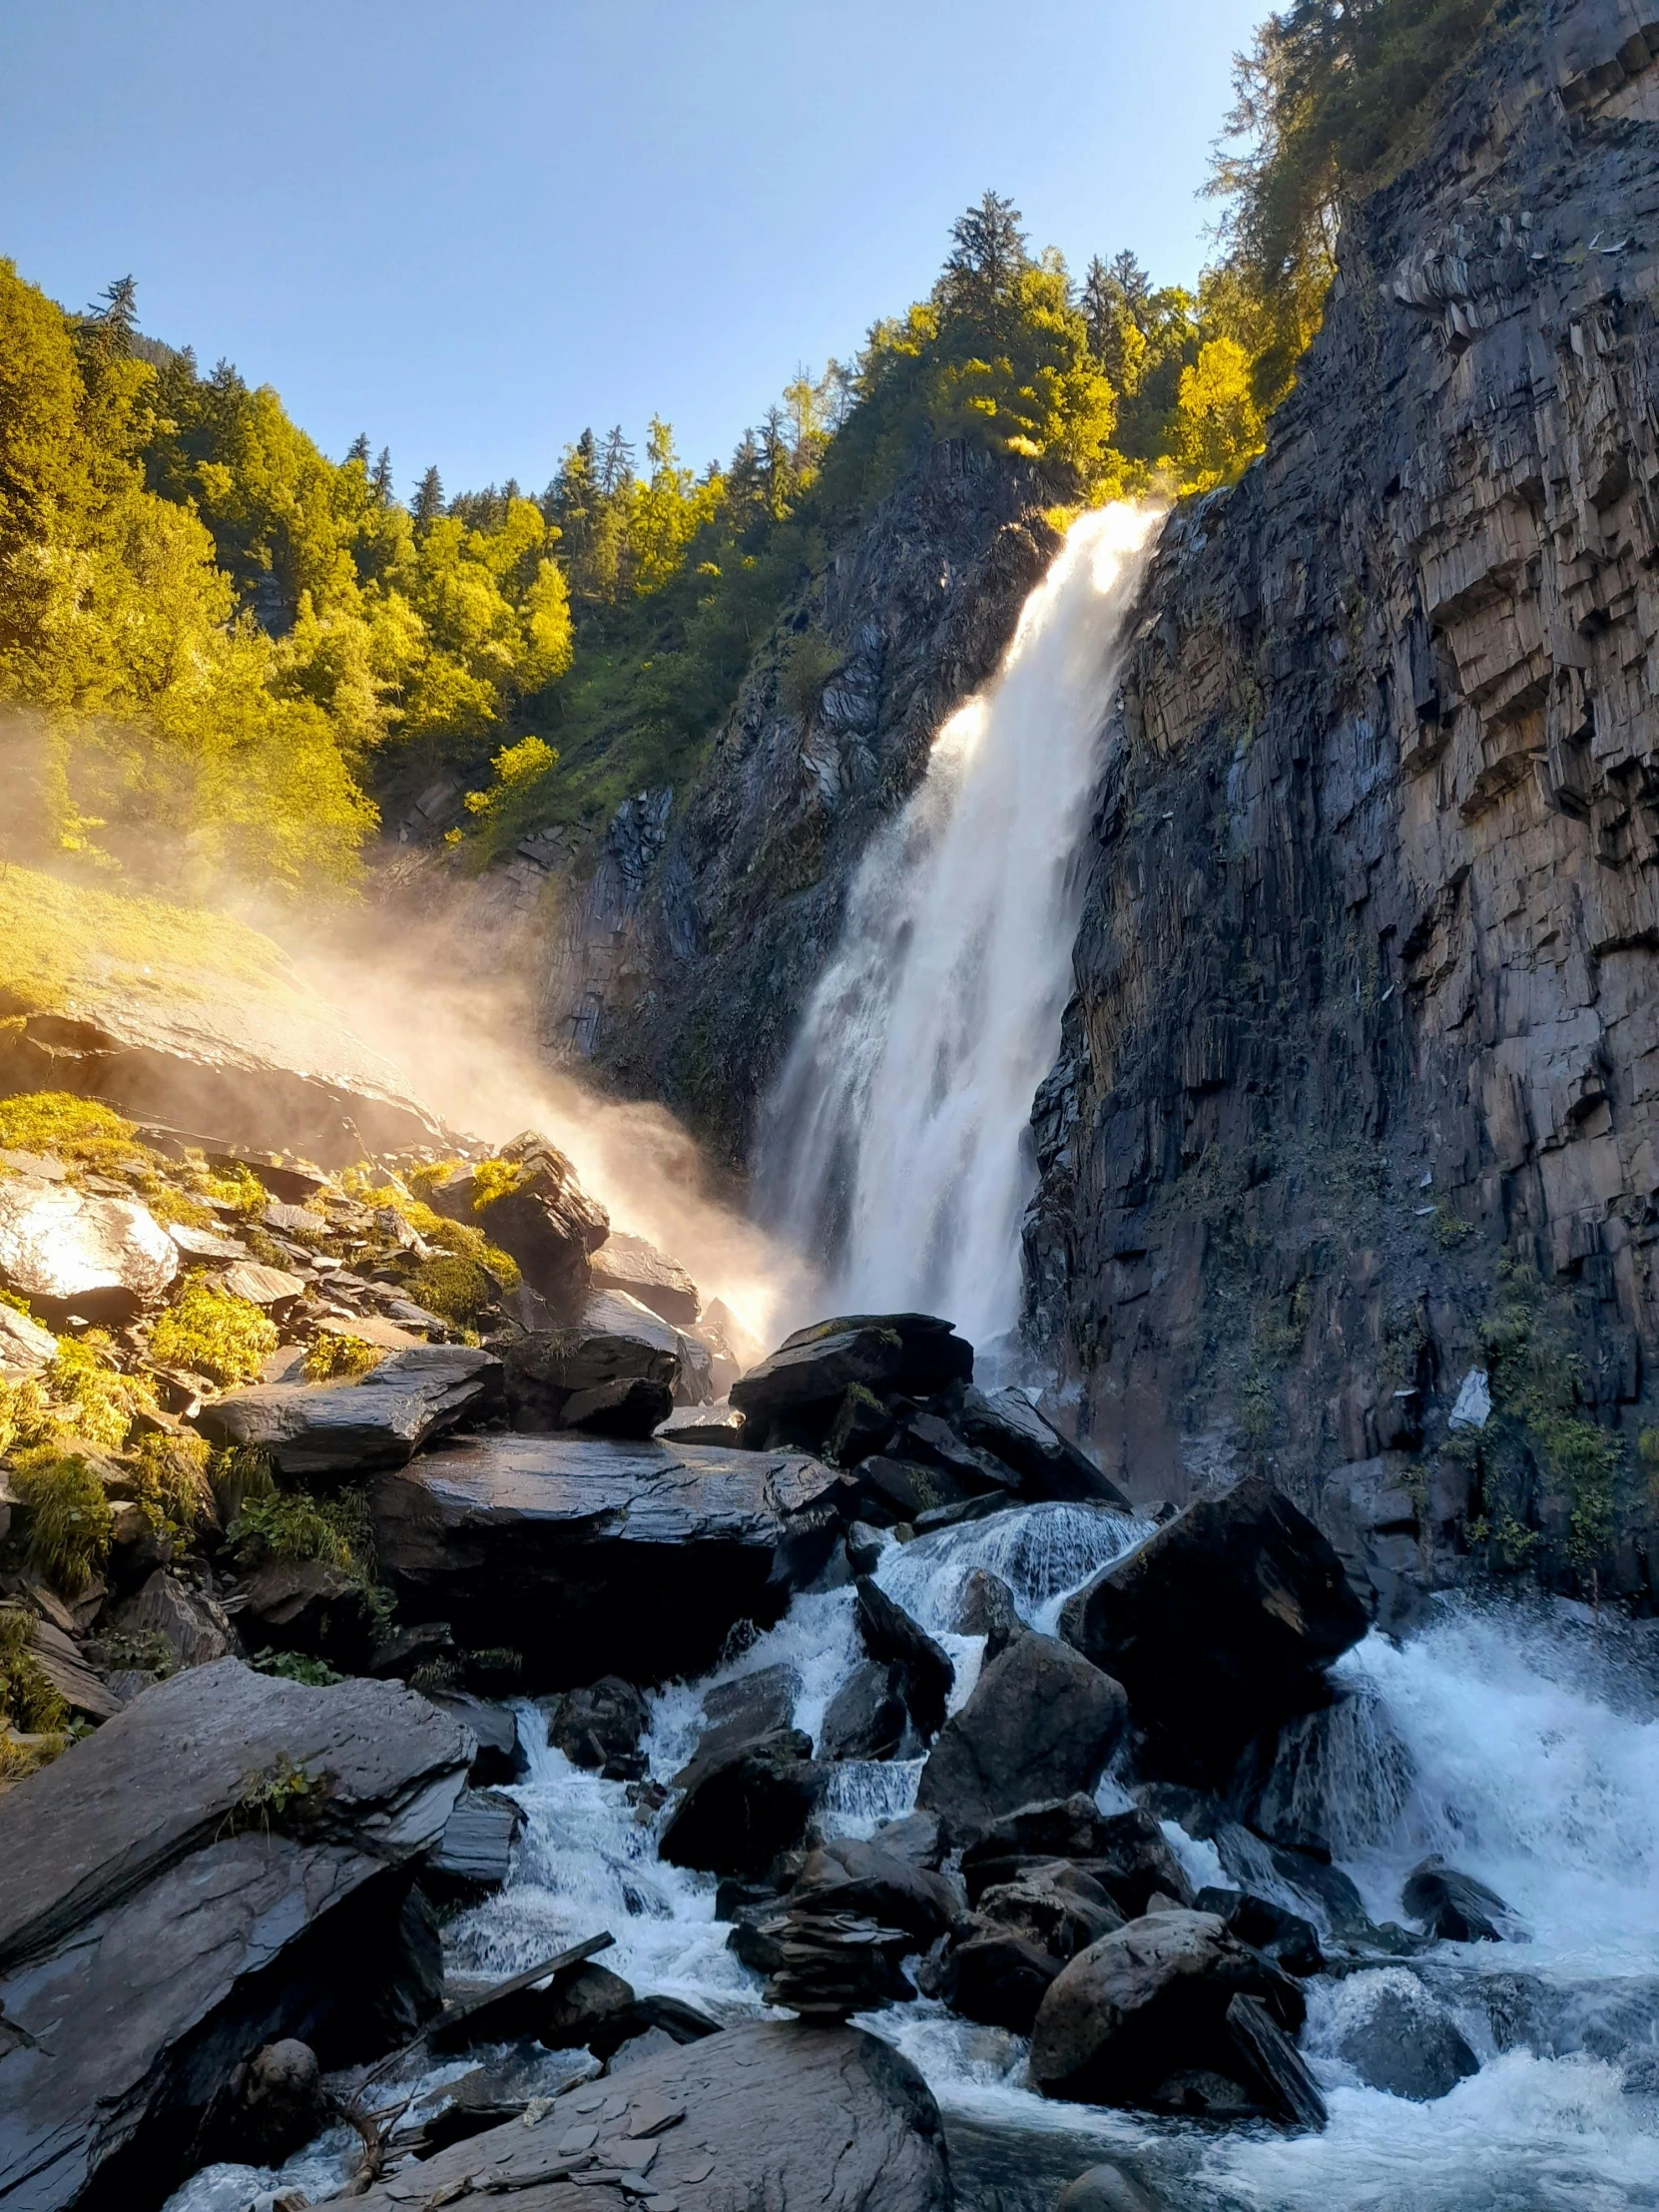 a large waterfall in the middle of a forest, full morning sun, norway mountains, 2022 photograph, guide